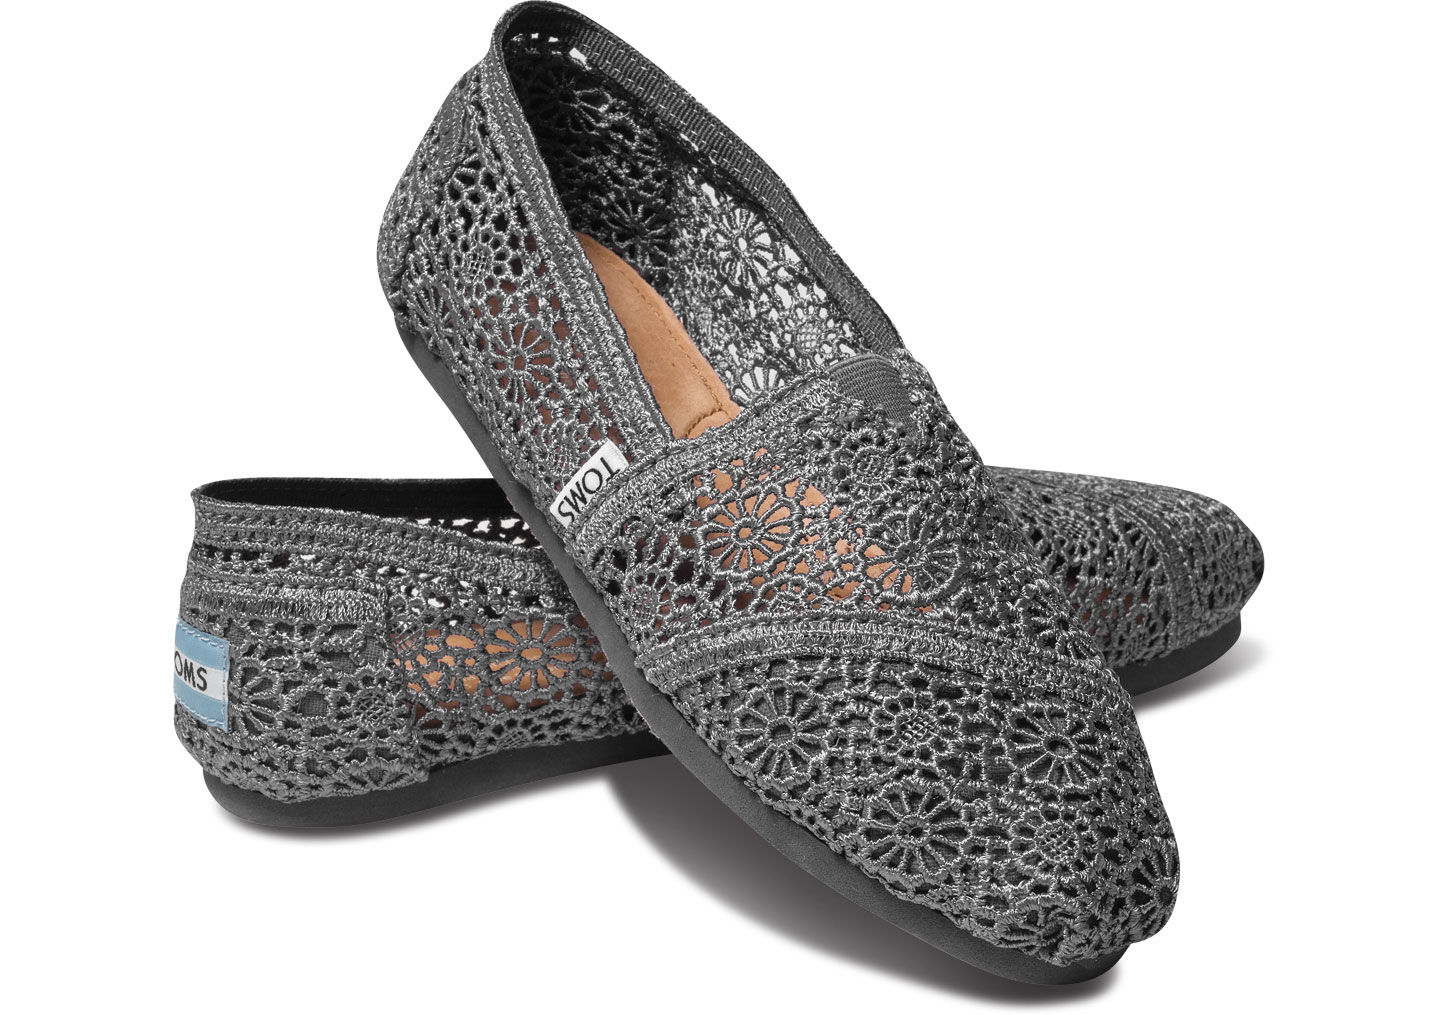 TOMS Shoes Sale | Up To 25% Off, Plus Extra $5.00 Off and ...